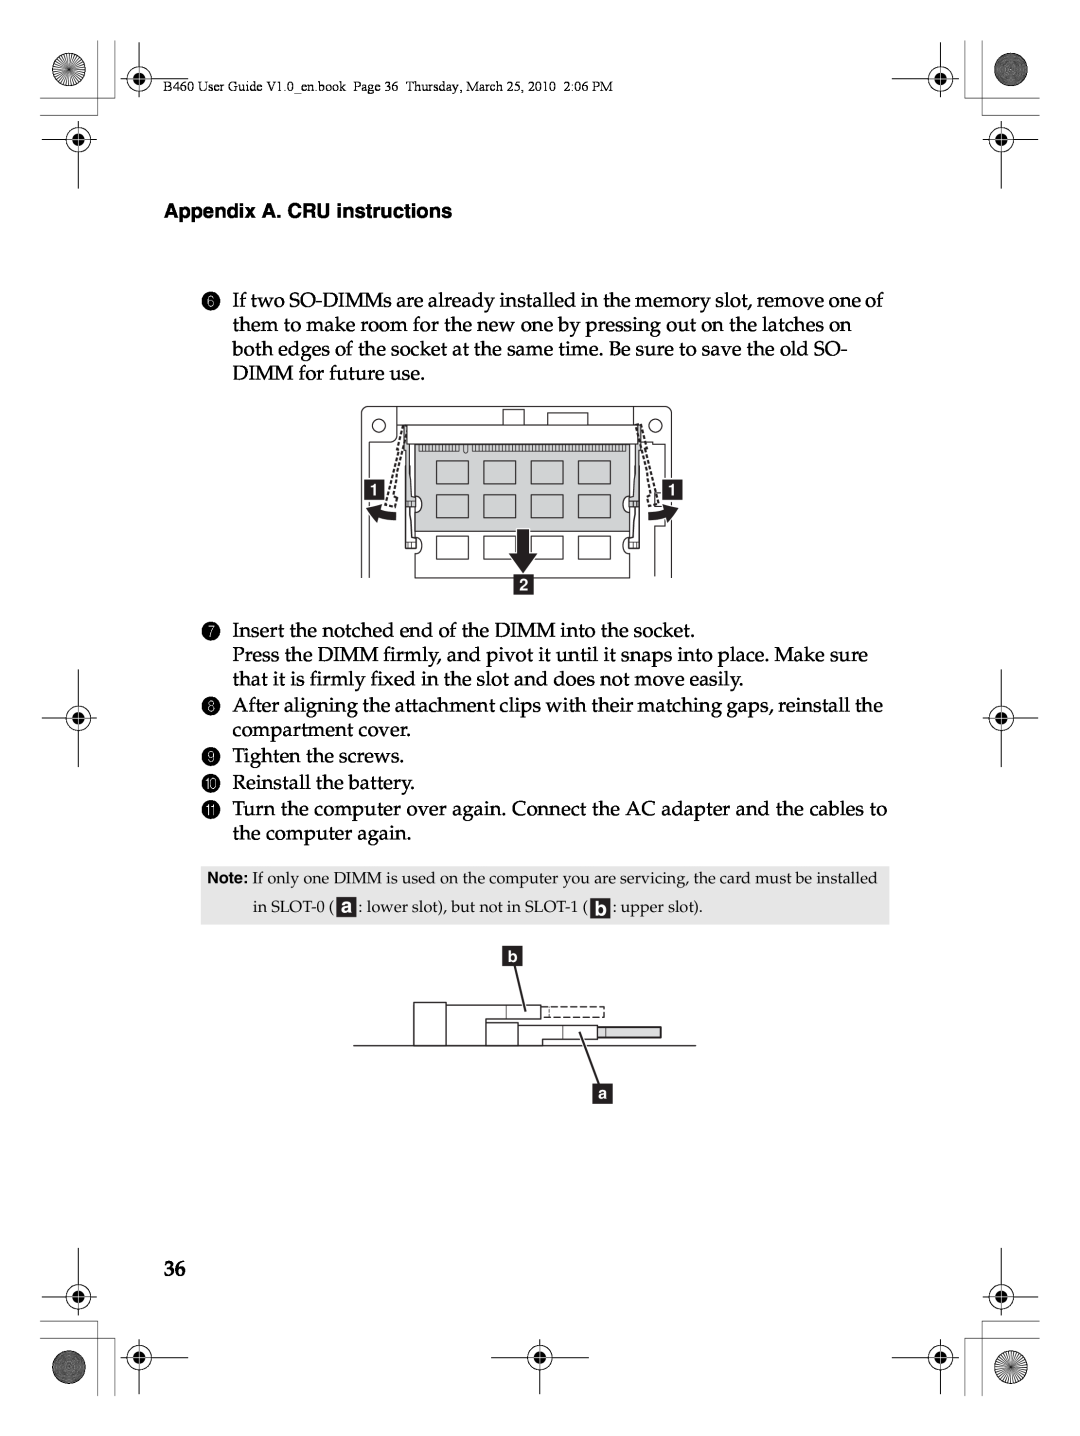 Lenovo B460 manual Appendix A. CRU instructions, Insert the notched end of the DIMM into the socket 